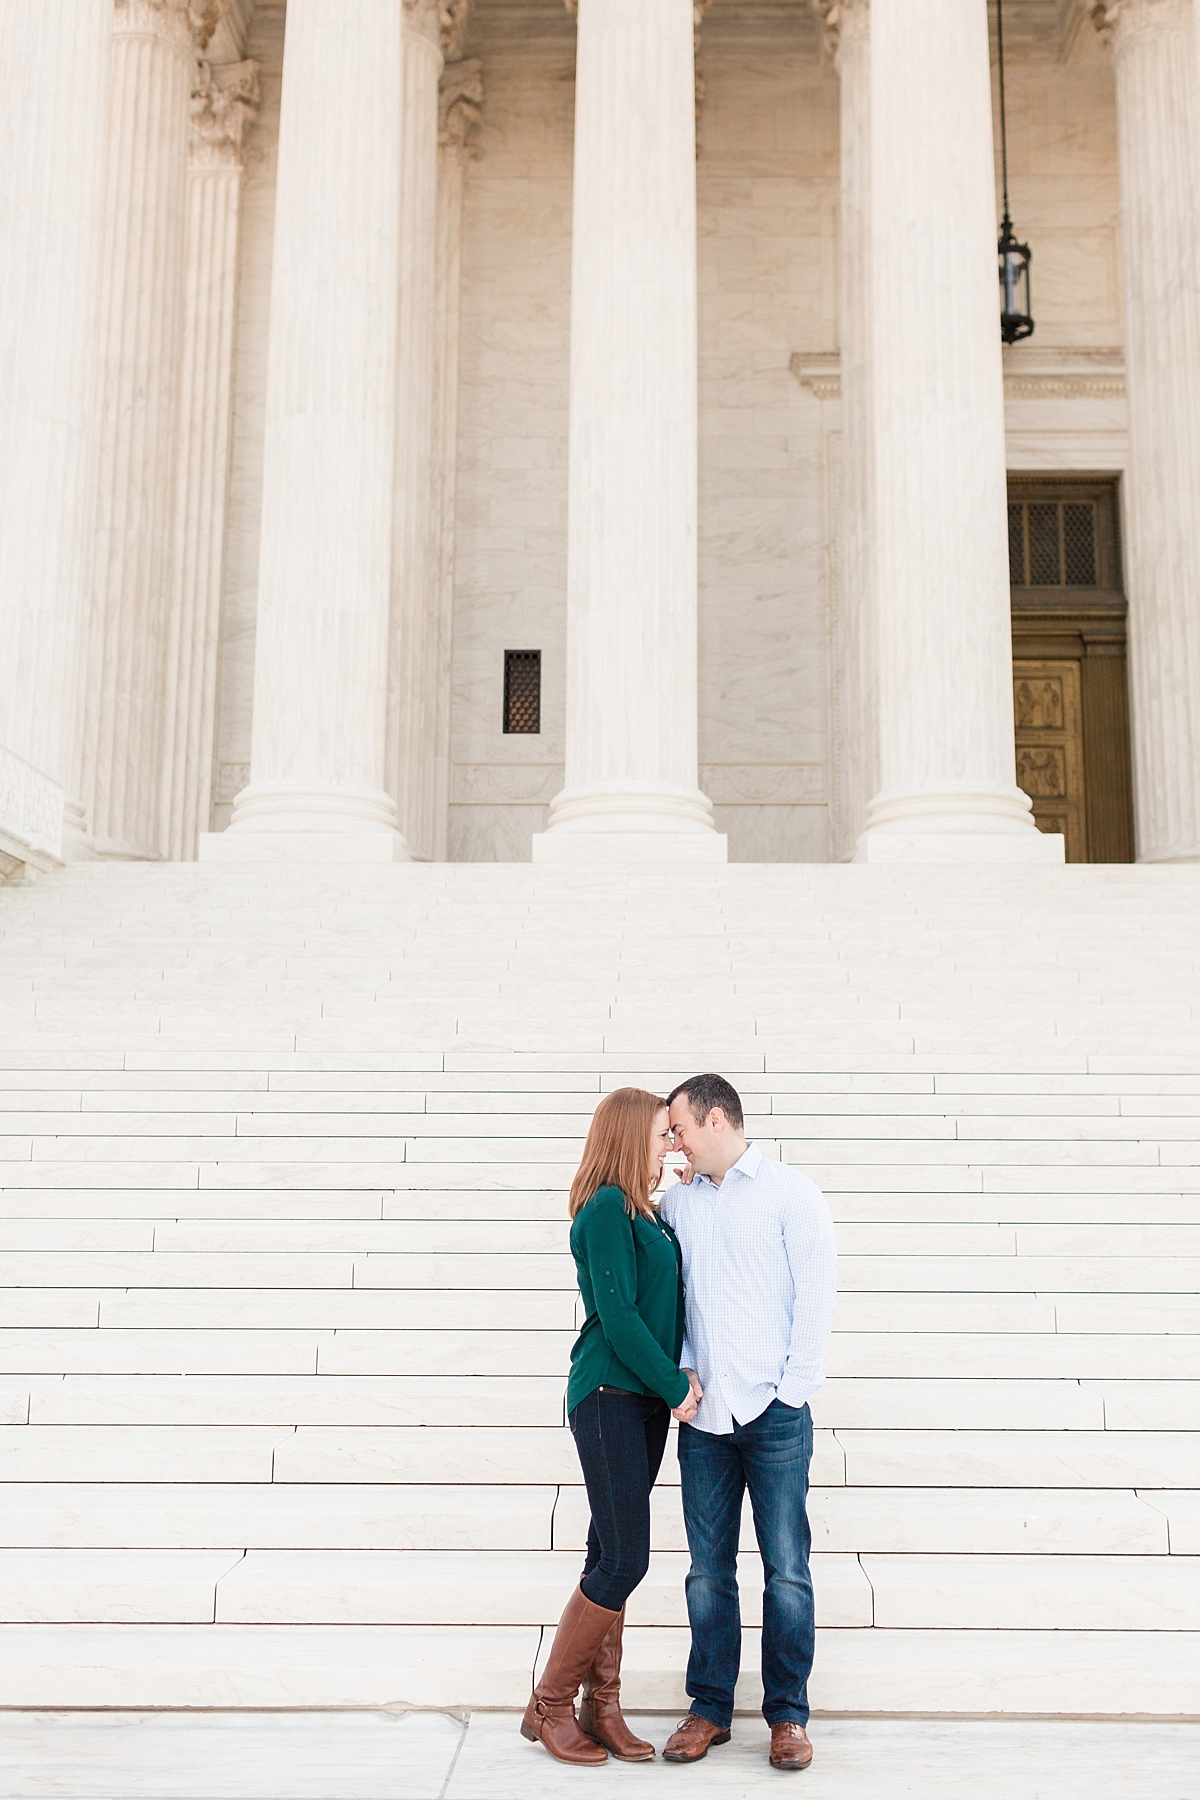 A classic Capitol Hill engagement session photographed by Washington, DC wedding and anniversary photographer, Alicia Lacey.